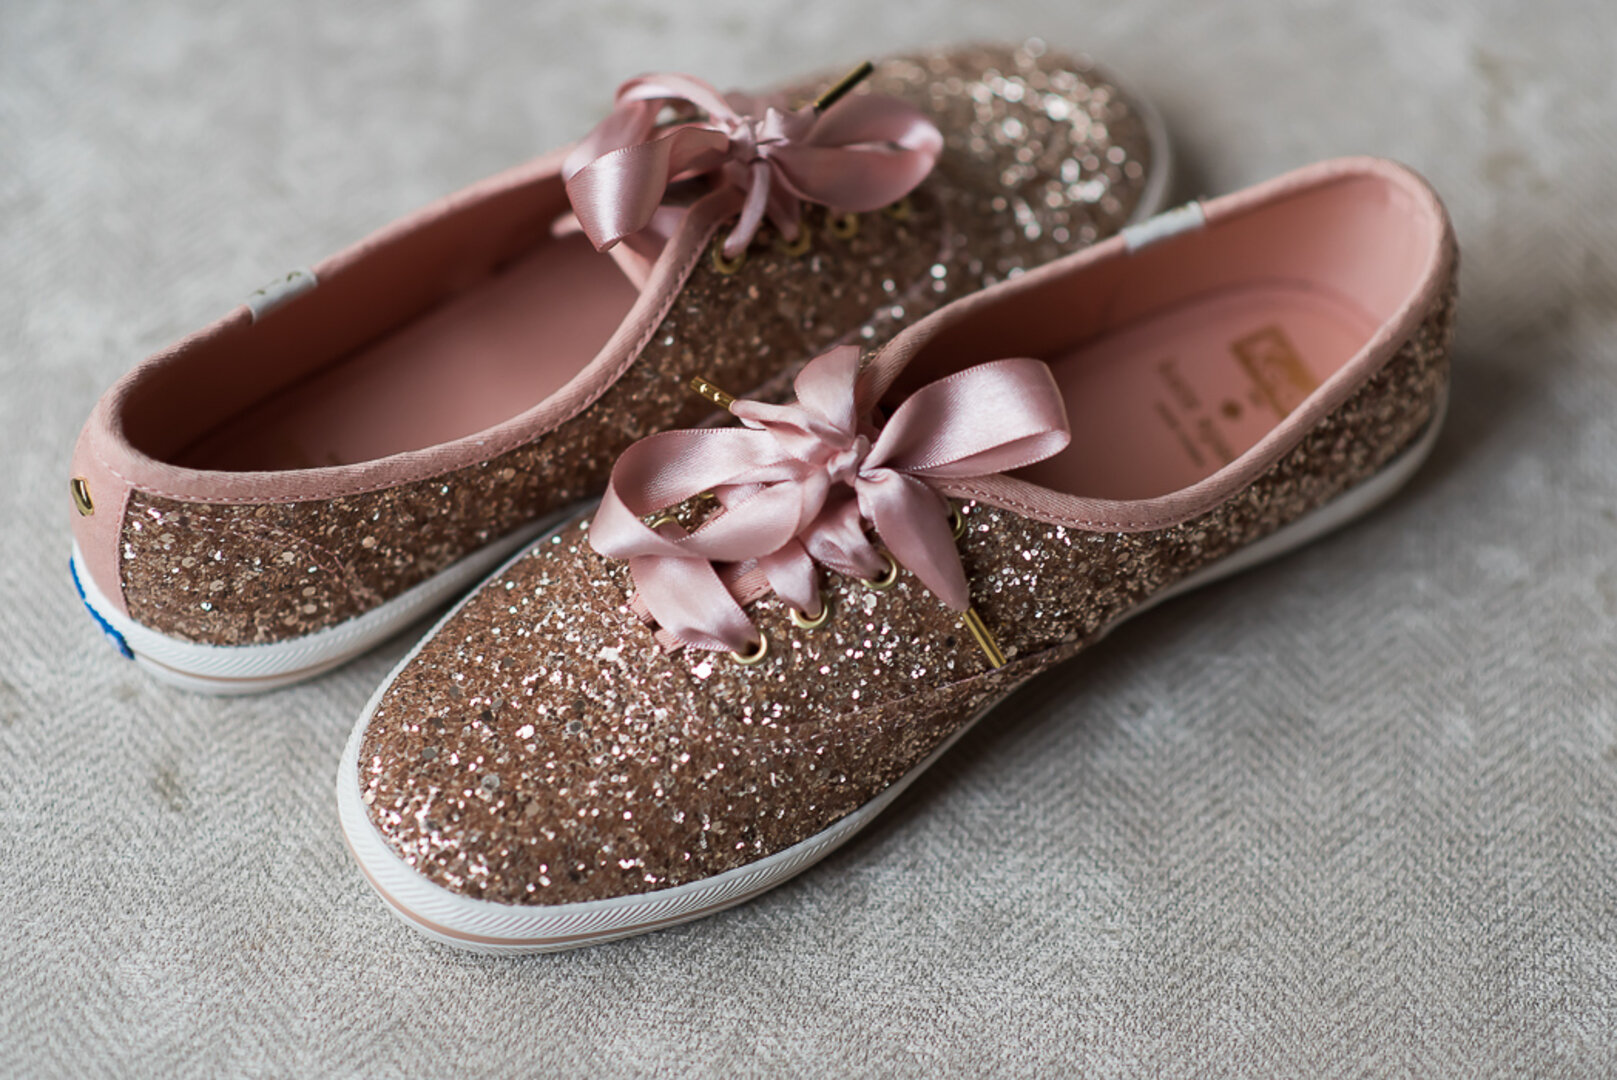 Pink wedding sneakers: Lacuna Lofts Modern Day Jewish Wedding captured by Ashley Hamm Photography. See more modern wedding ideas at CHItheeWED.com!